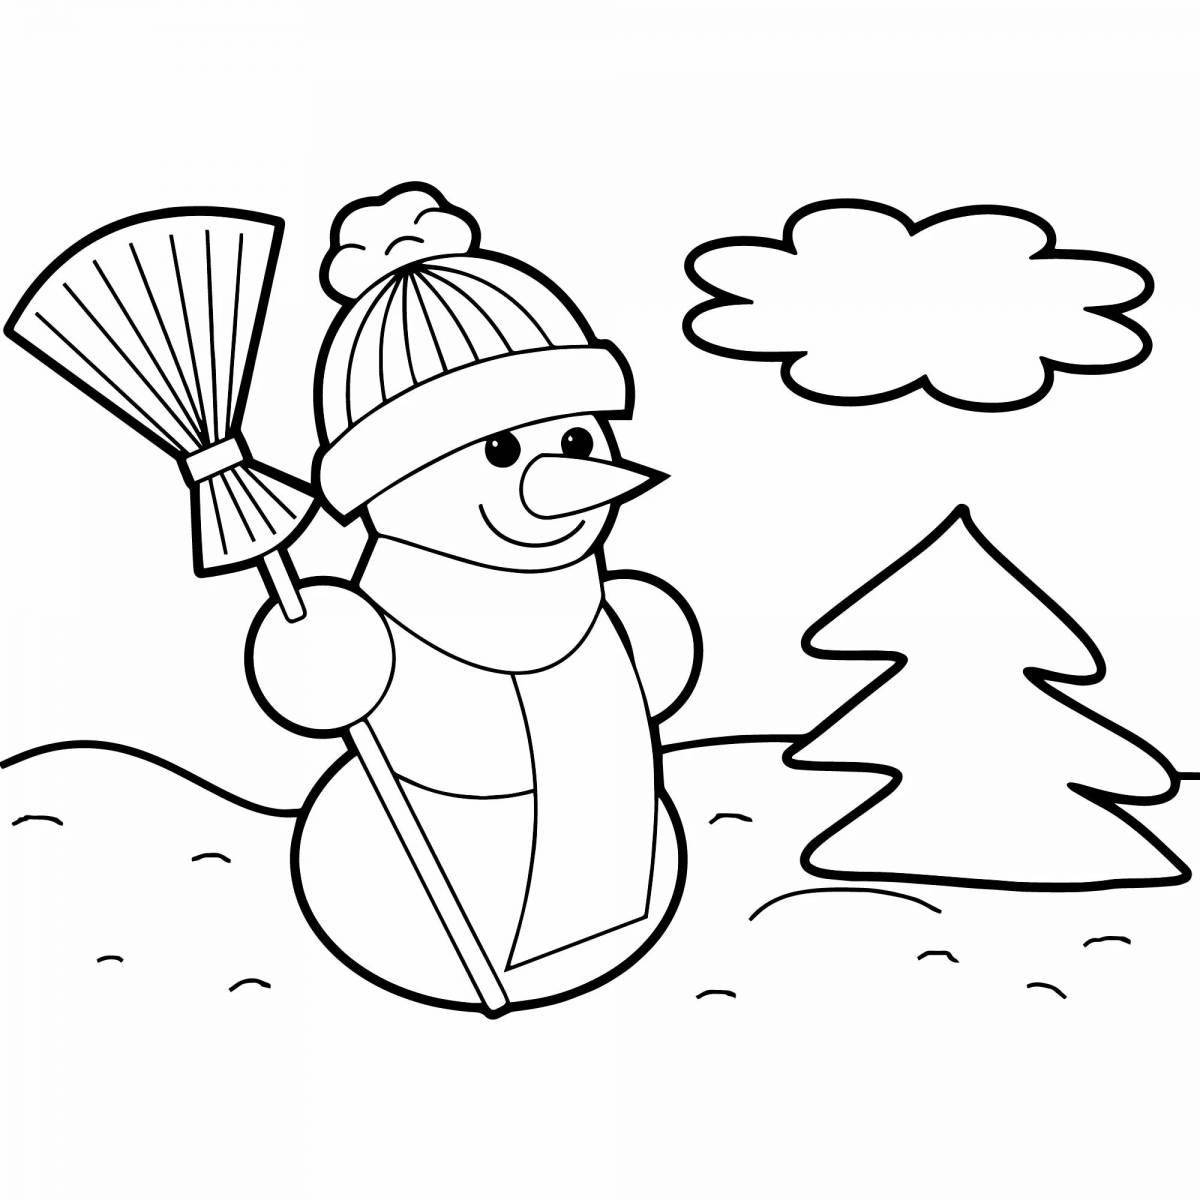 Shiny winter day coloring book